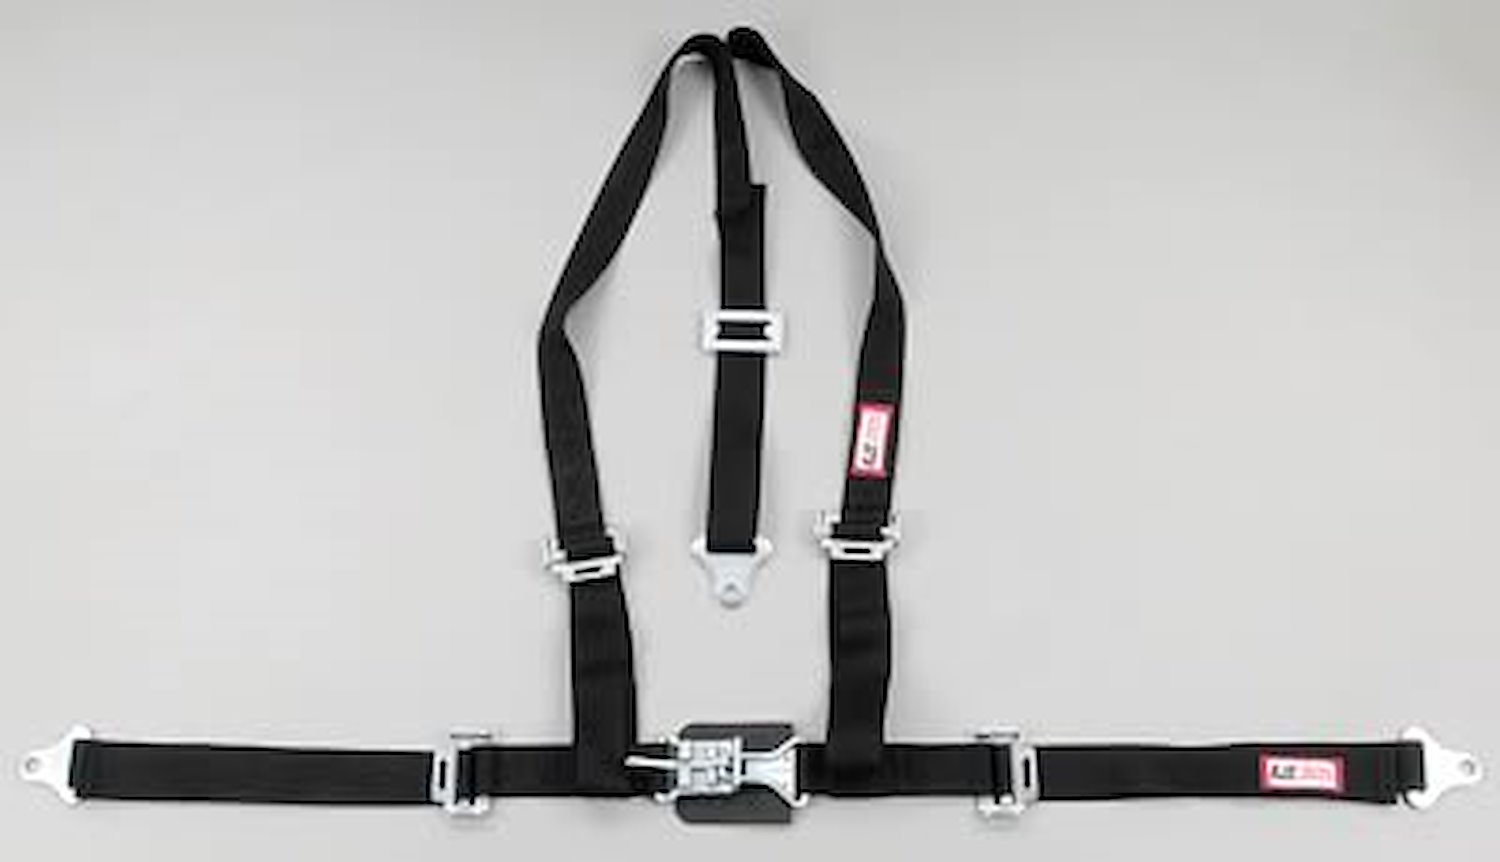 NON-SFI L&L HARNESS 2 PULL UP Lap Belt SEWN IN 2 S.H. Y FLOOR Mount ALL WRAP ENDS PURPLE